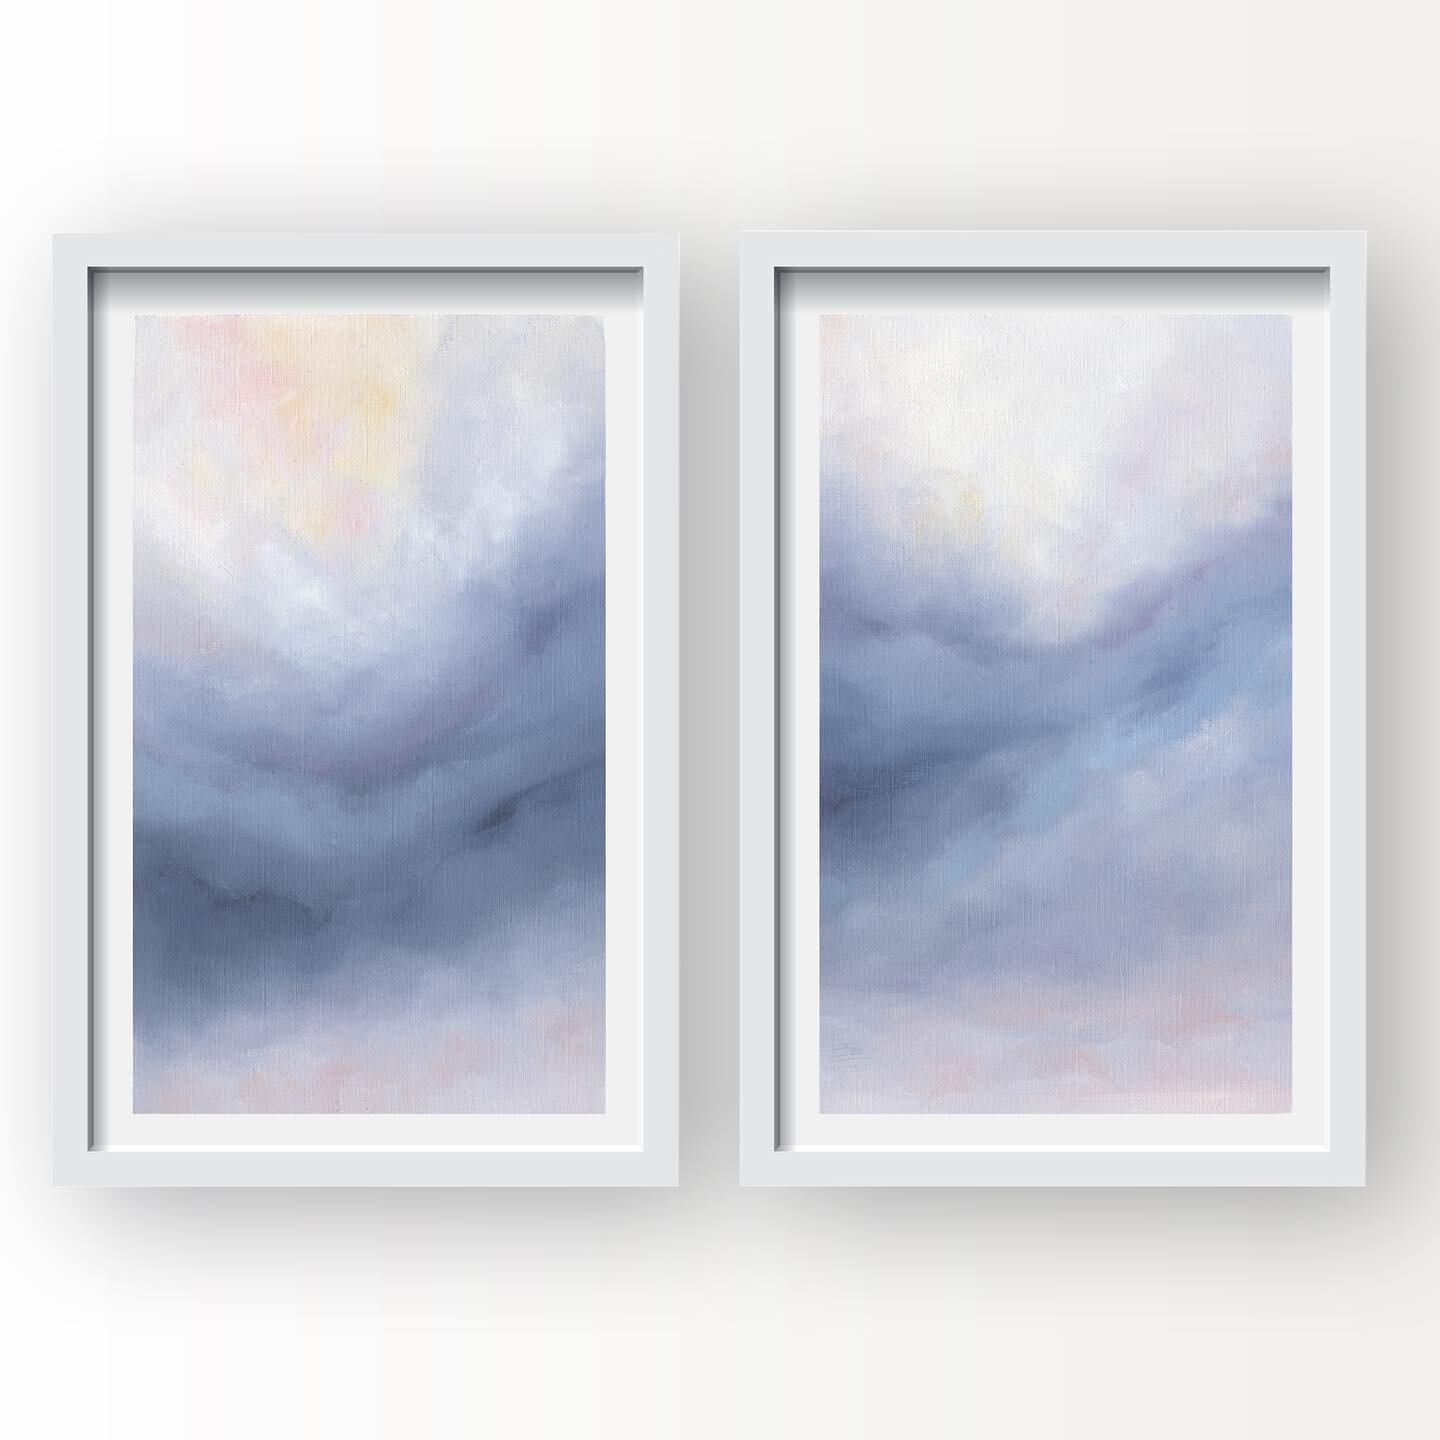 Another lesson in letting go. In a quiet moment I painted this completely unplanned abstract diptych. Most of my recent paintings have been recognizable as landscapes (clouds, sky, water, land) but this one took on another nature. I simply started pu